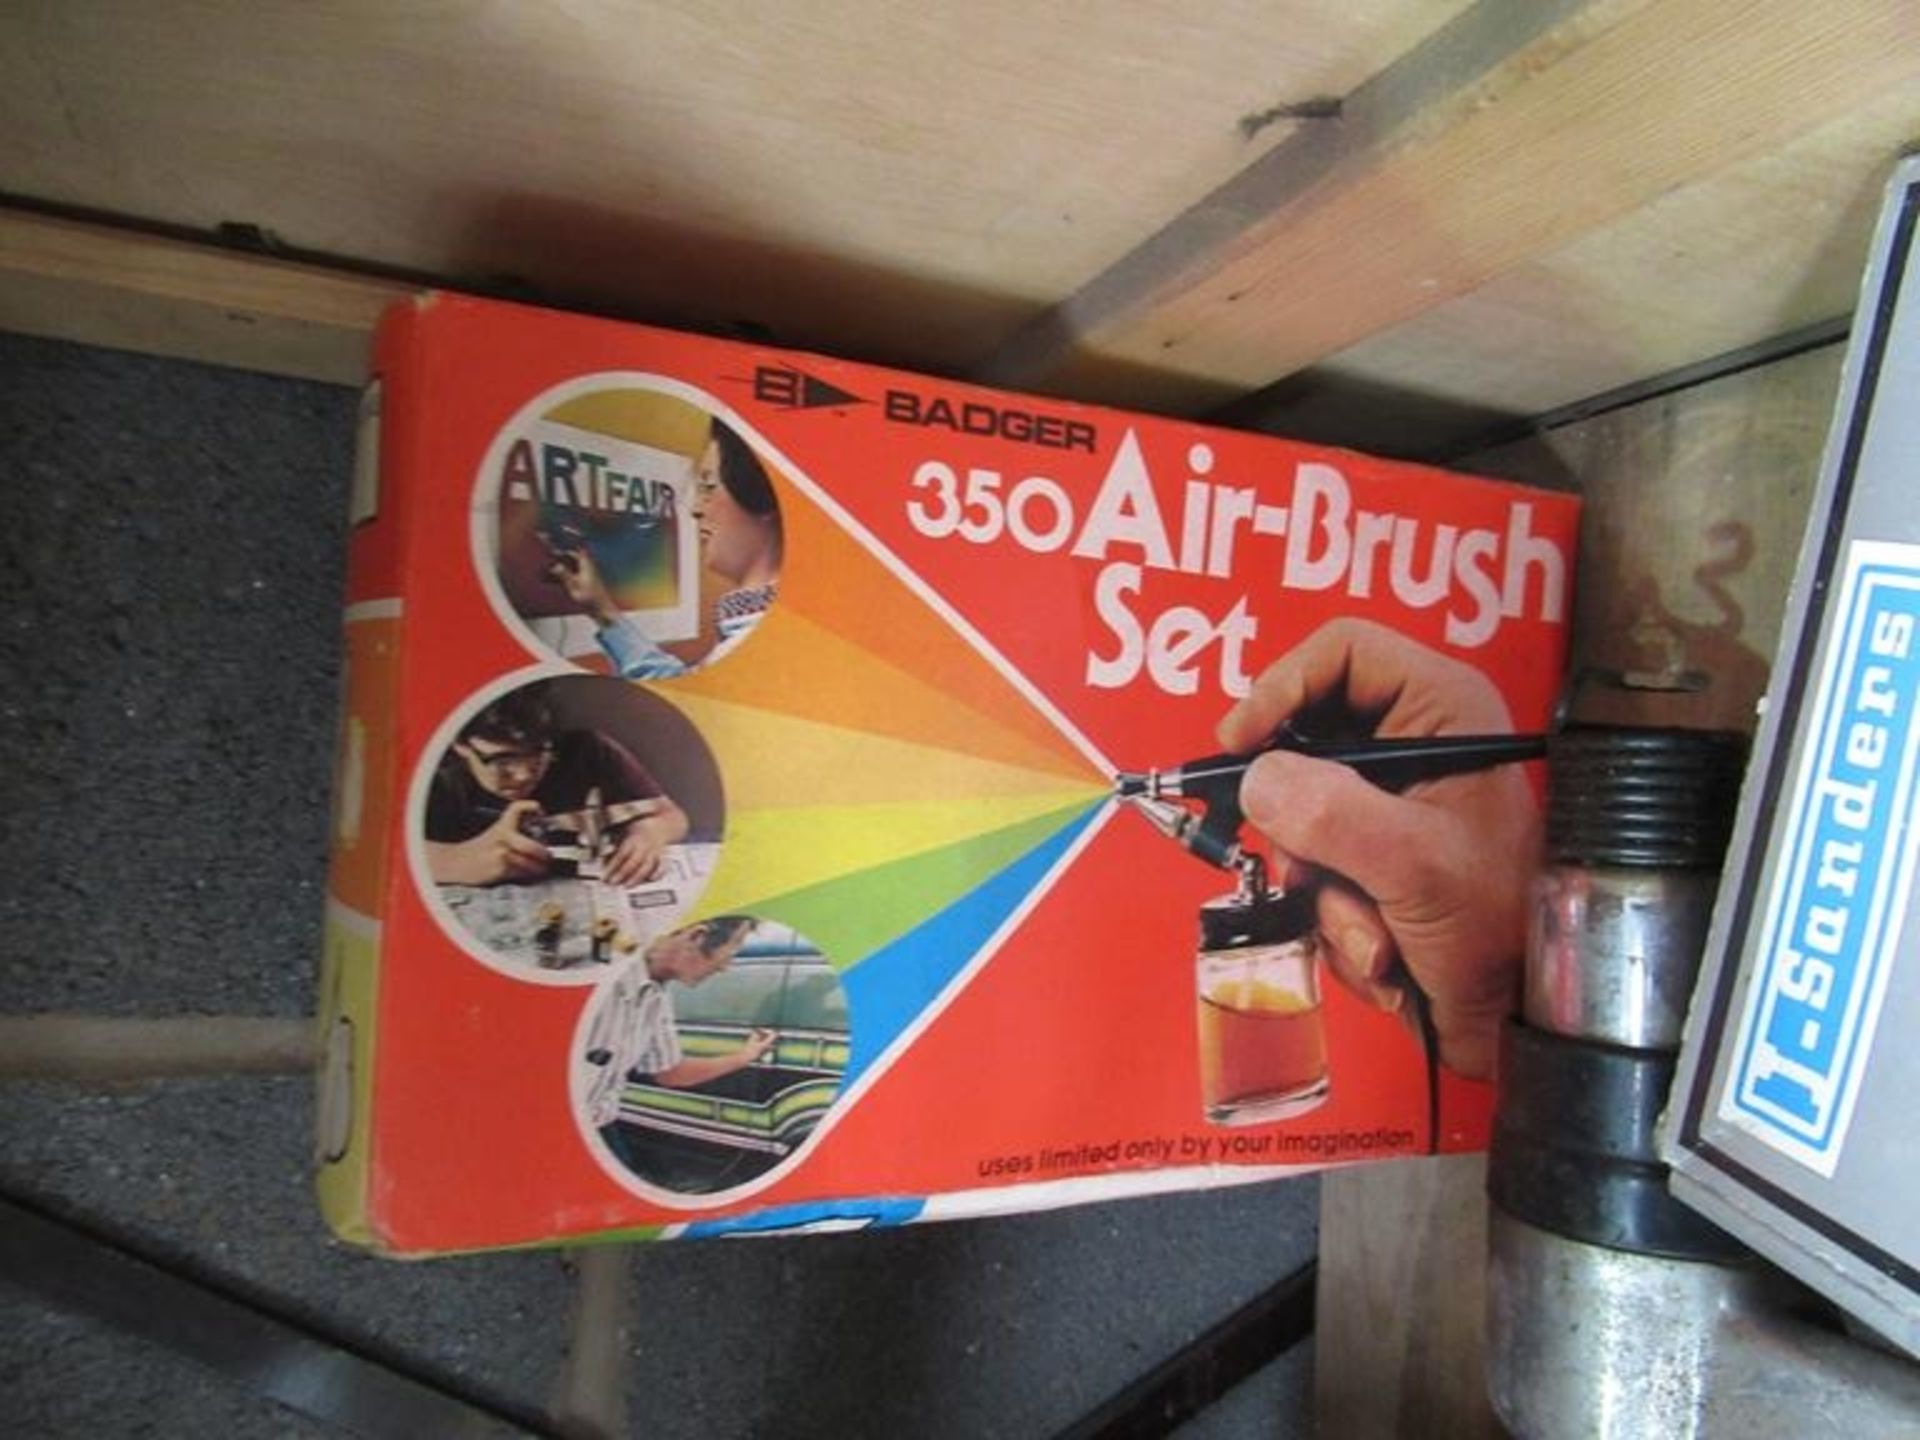 Contents of shelf to include Badger 350 Airbrush S - Image 3 of 5